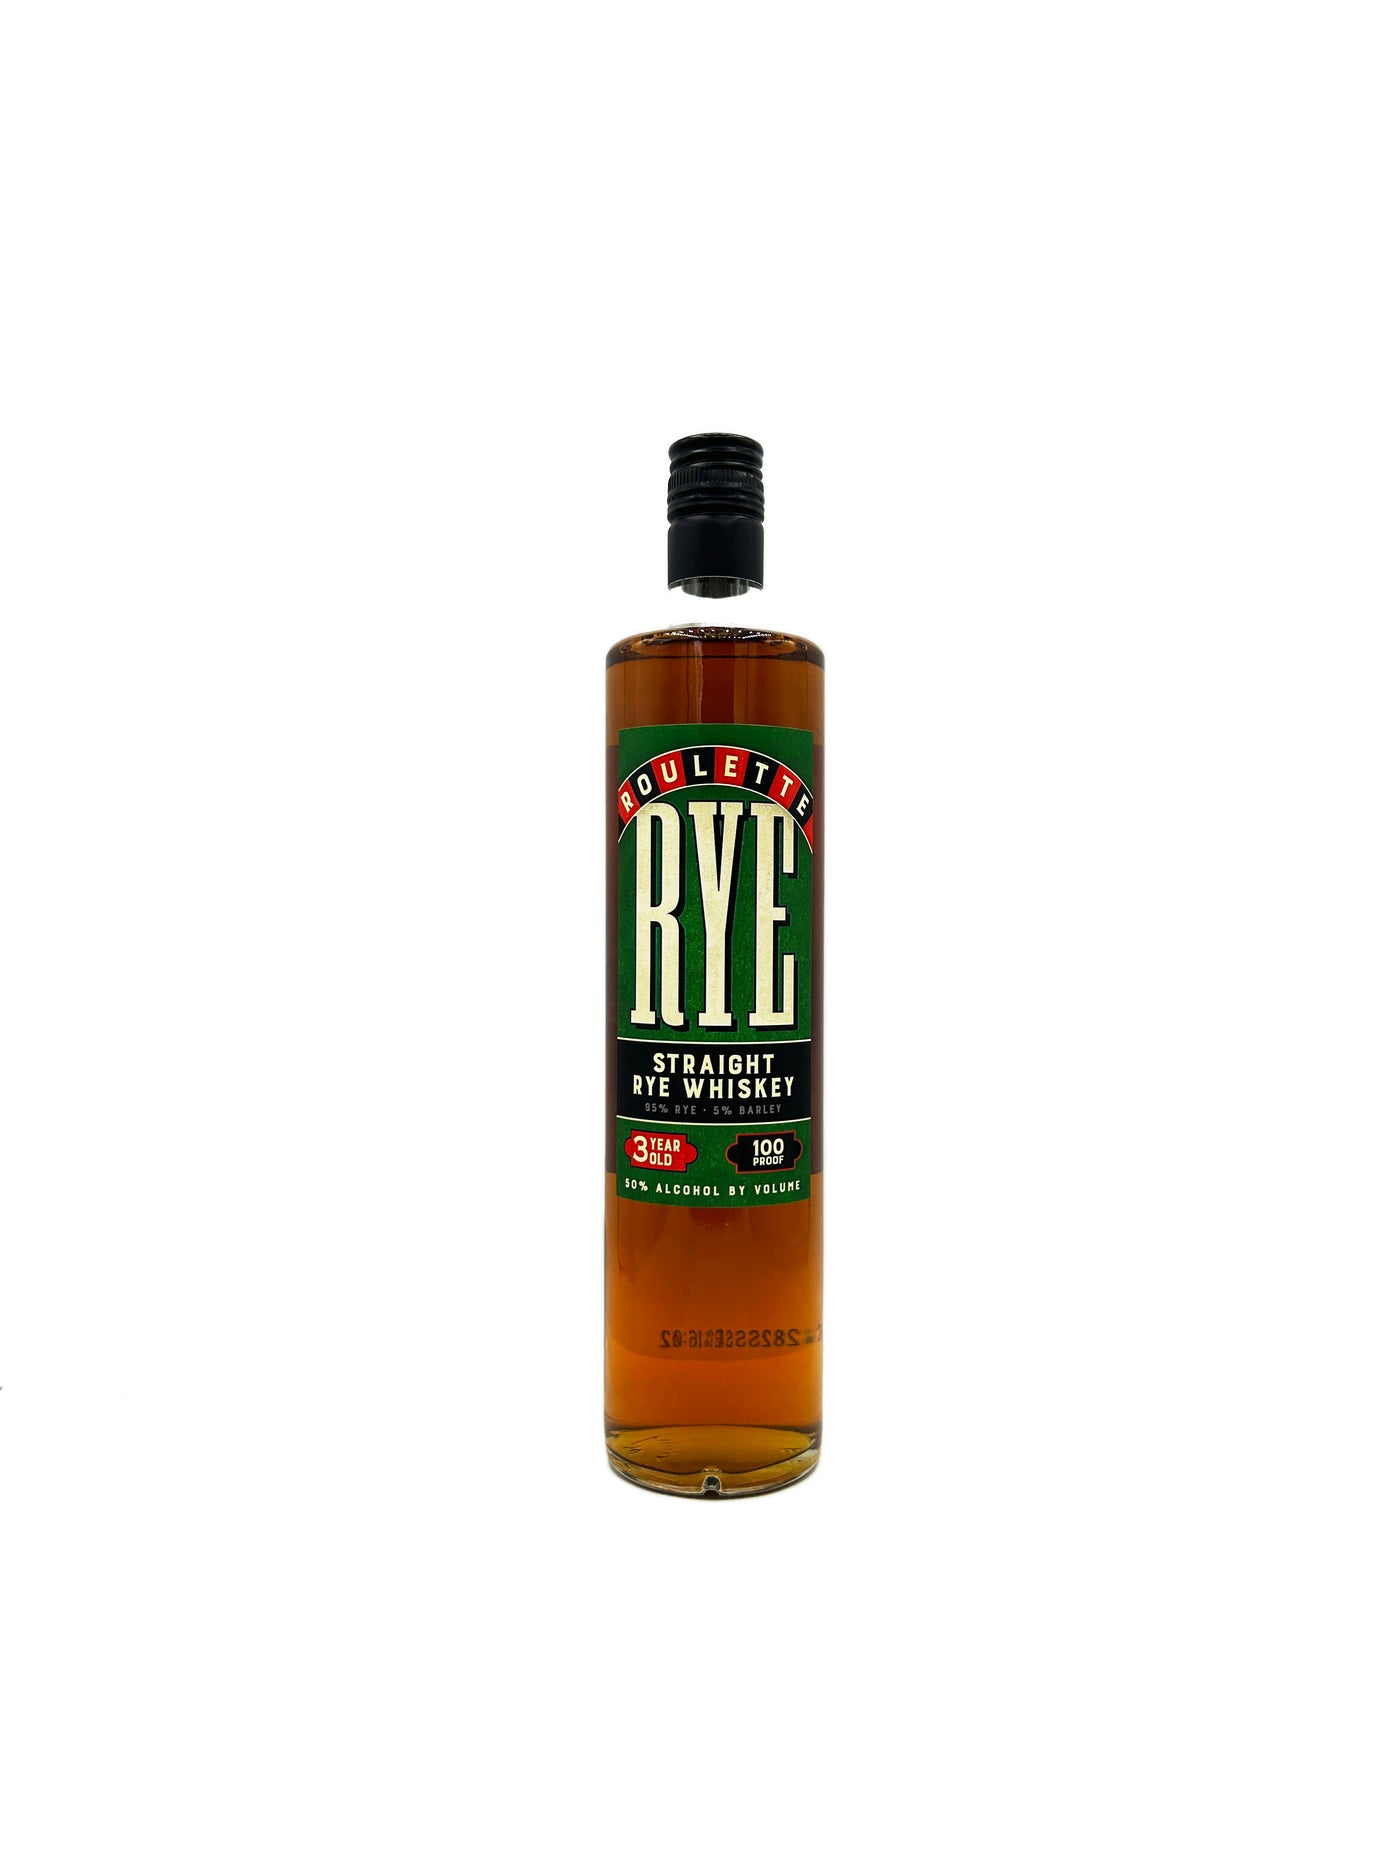 Proof and Wood Deadwood 'Roulette Rye' Rye Whiskey 750ml